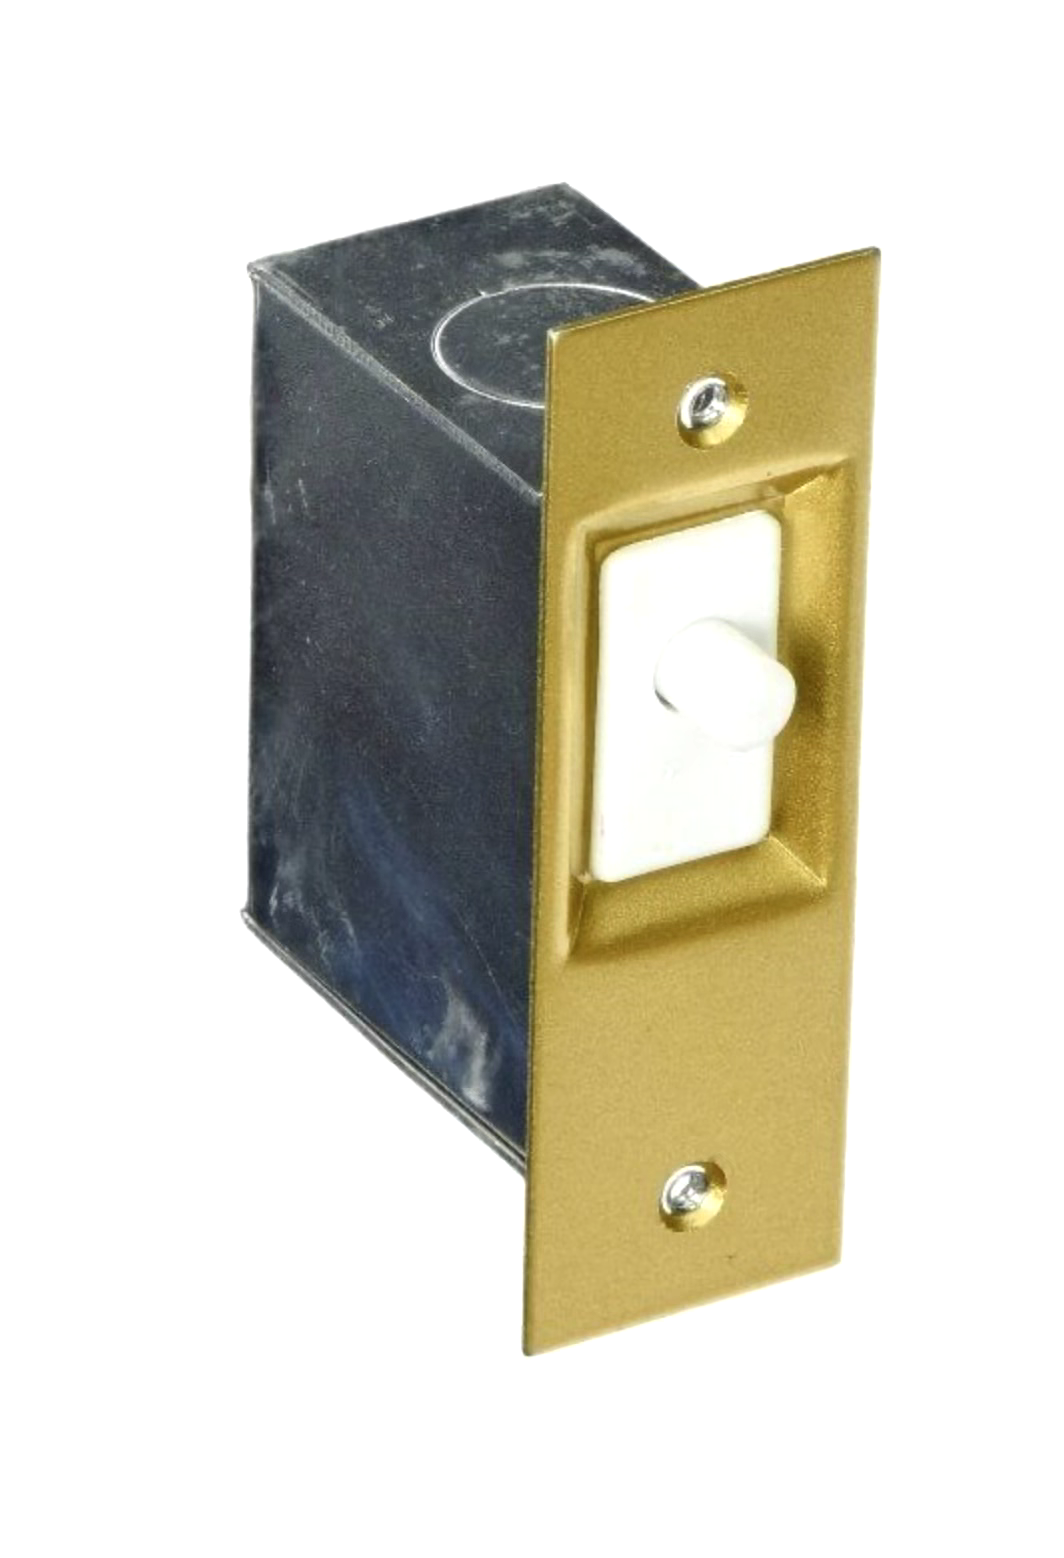 Lee Electric 210DN Door Light Switch 120AC 10 Amp New In Box - $20.85